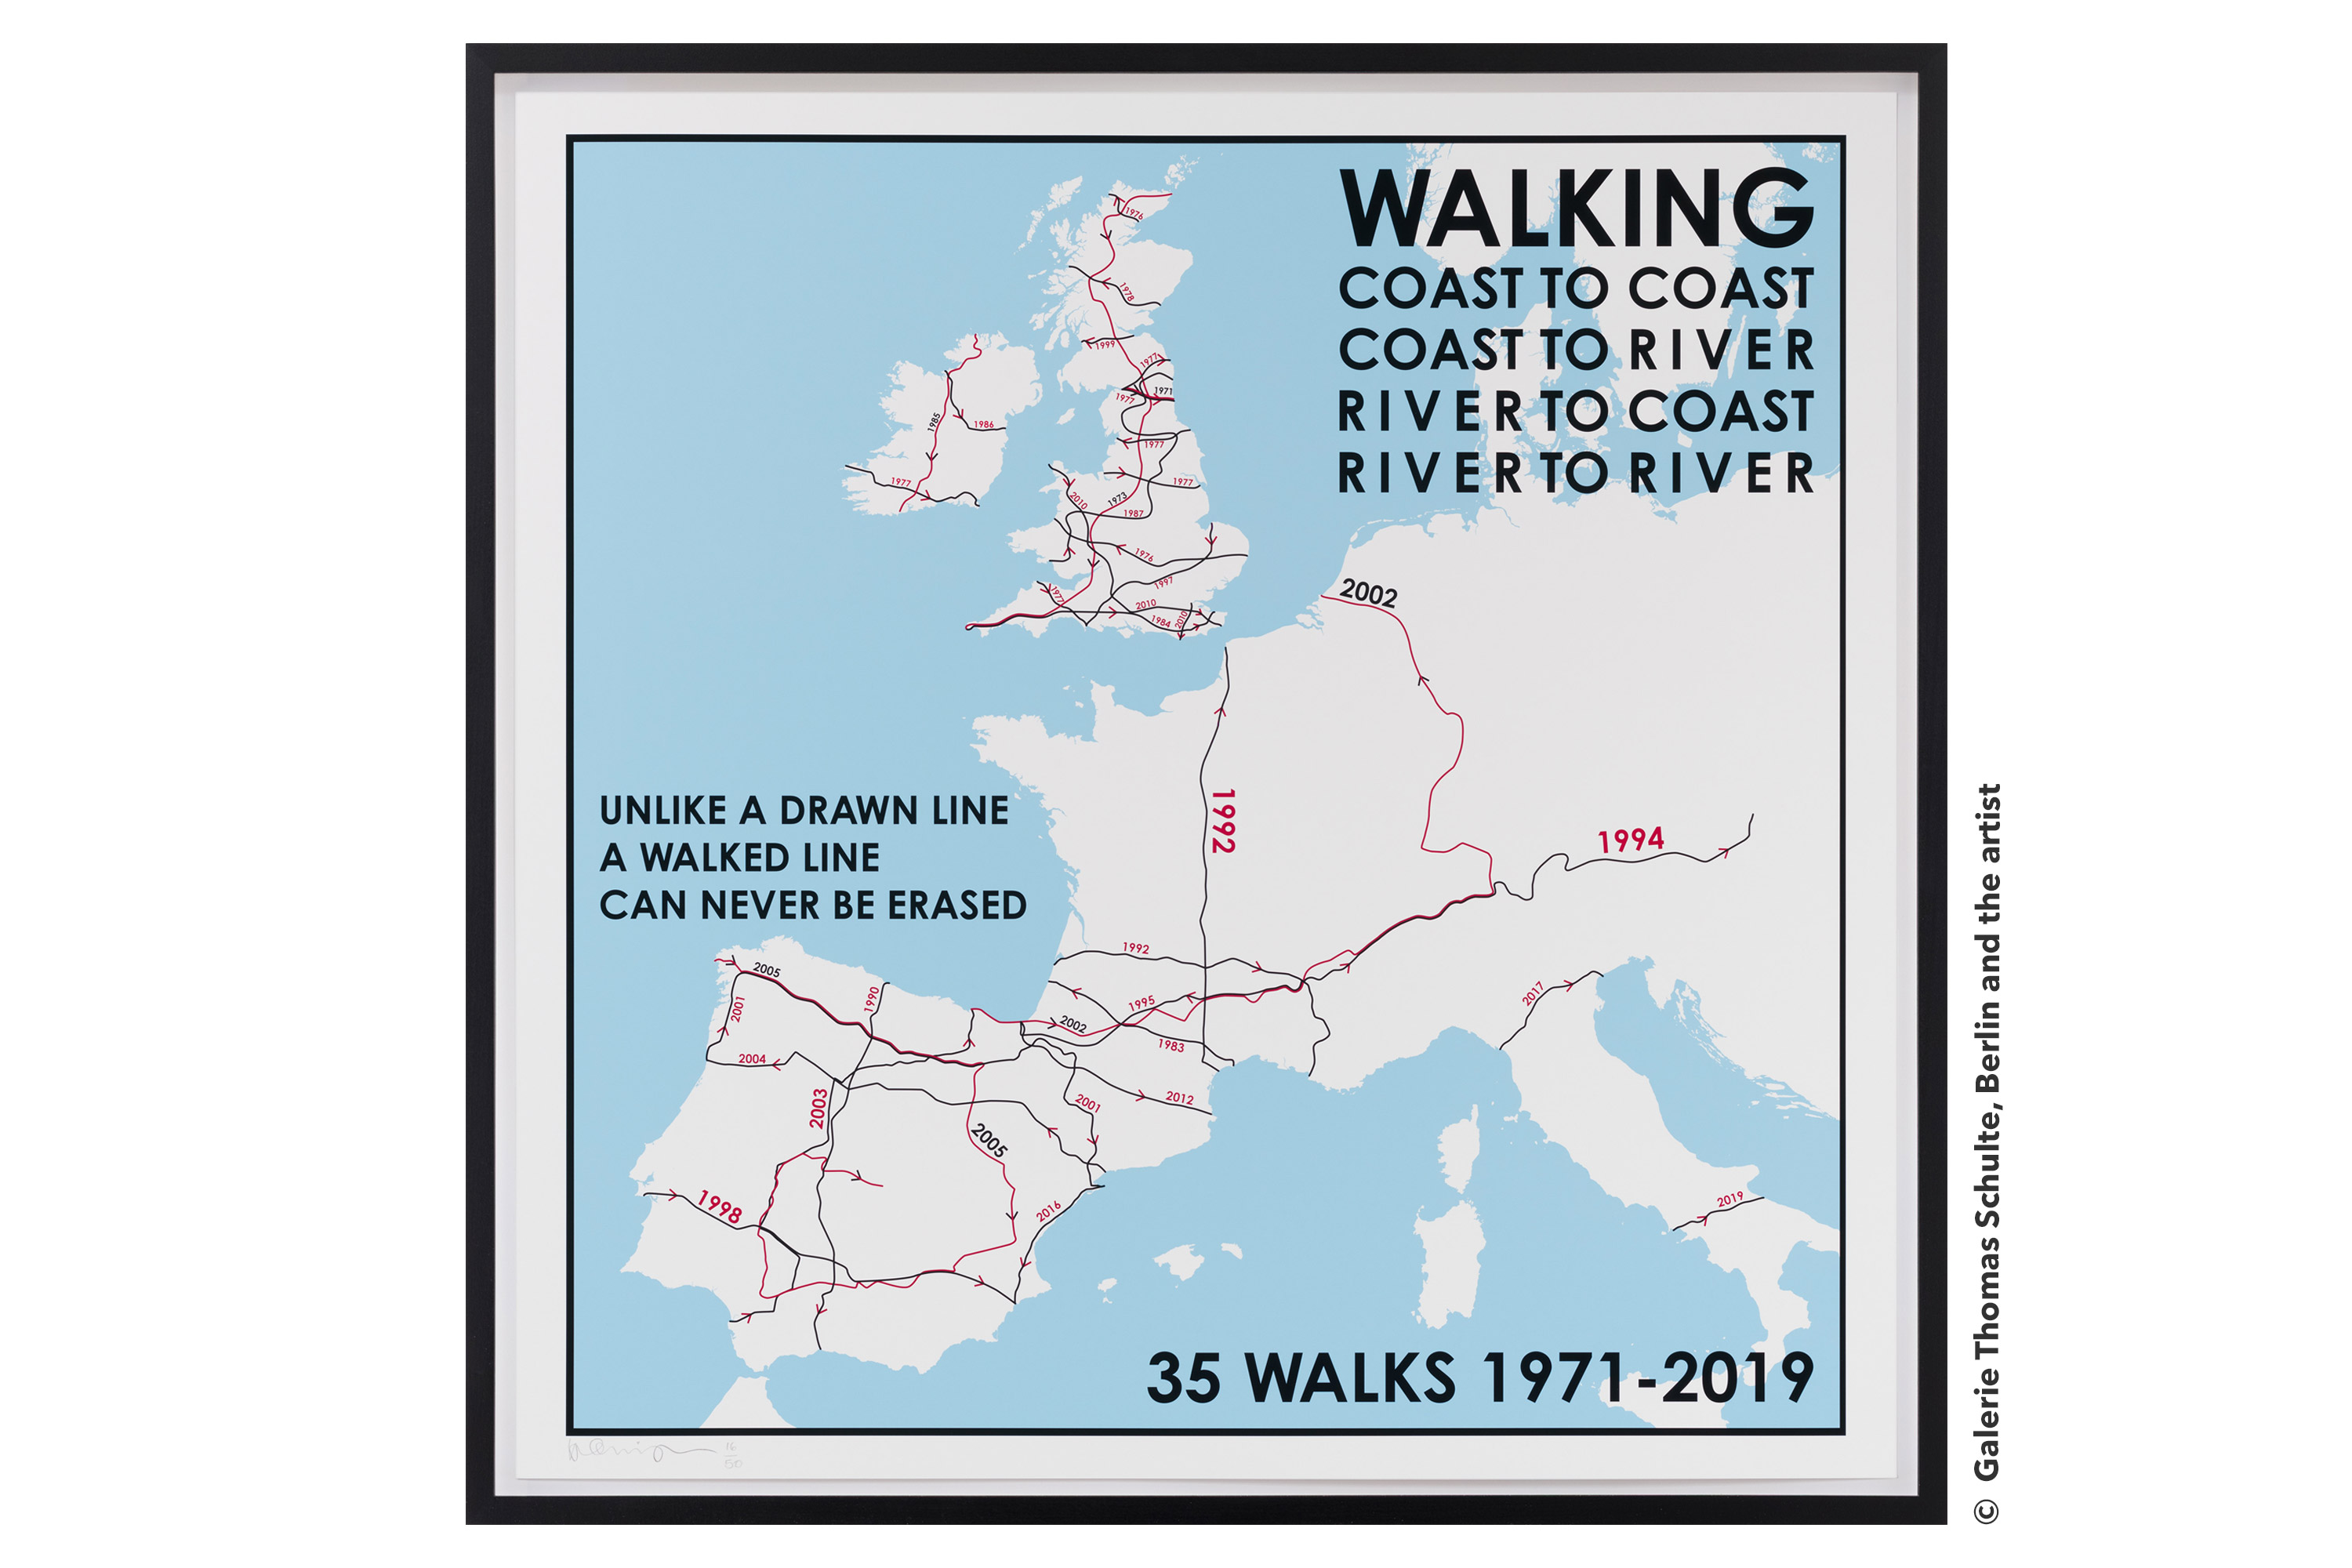 Hamish Fulton, 35 Walks Map. Europe. 1971-2019, 2019, Druck, 68,2 x 67,7 cm ©  Galerie Thomas Schulte, Berlin and the artist